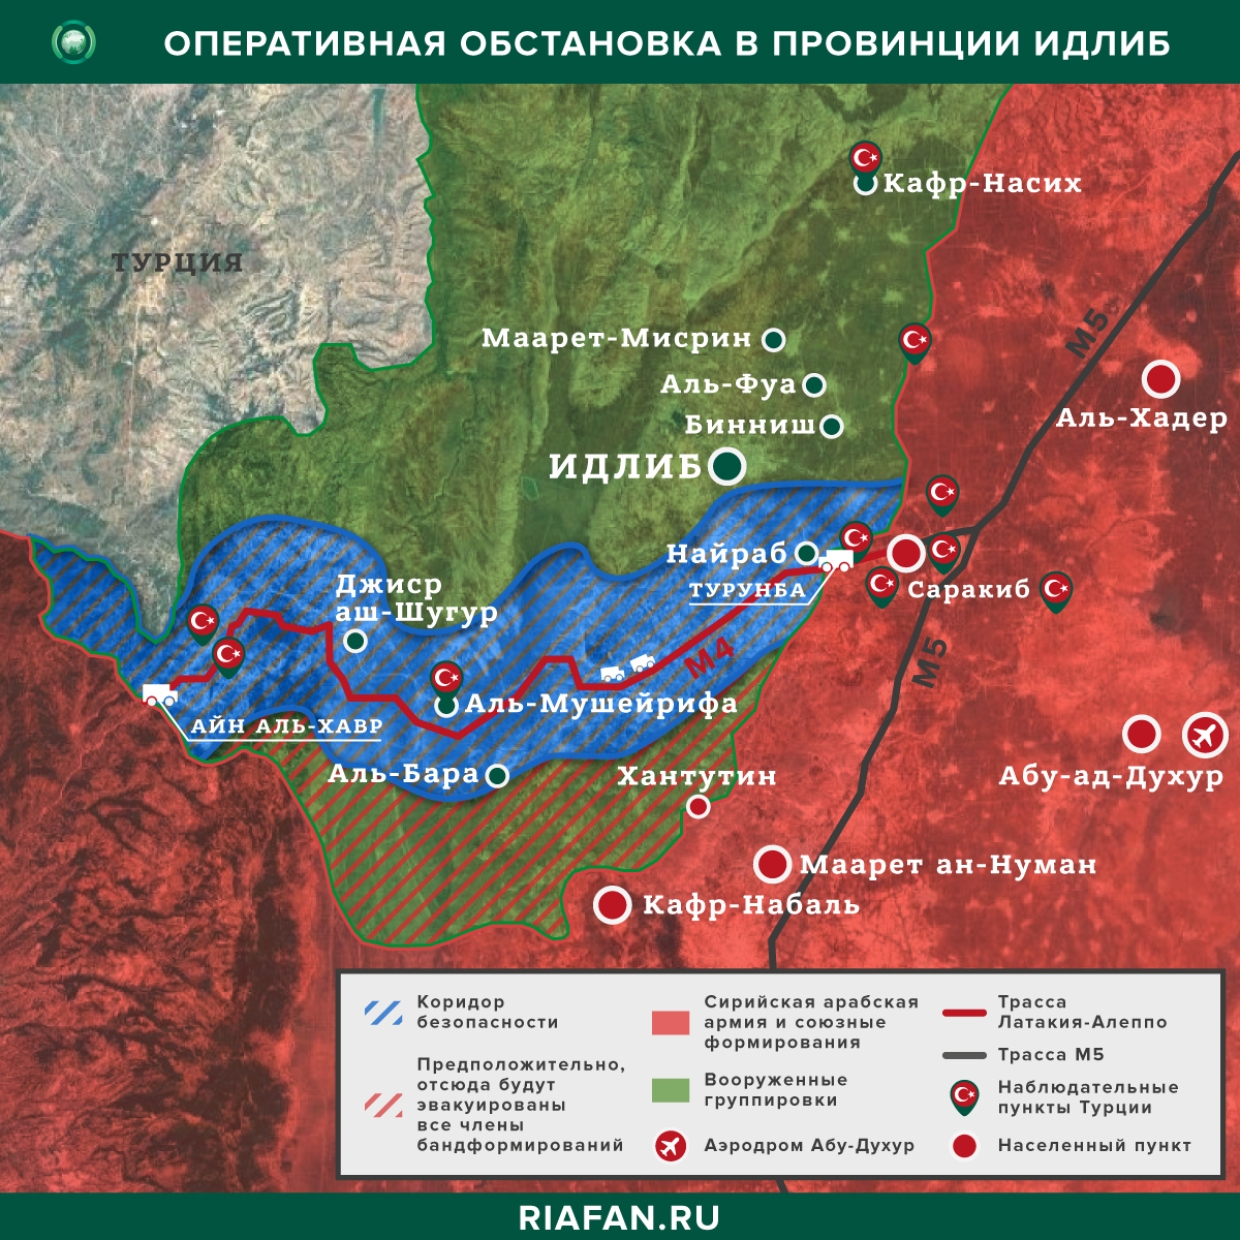 Syria totals on 7 September 06.00: Turkish soldiers attacked in Idlib